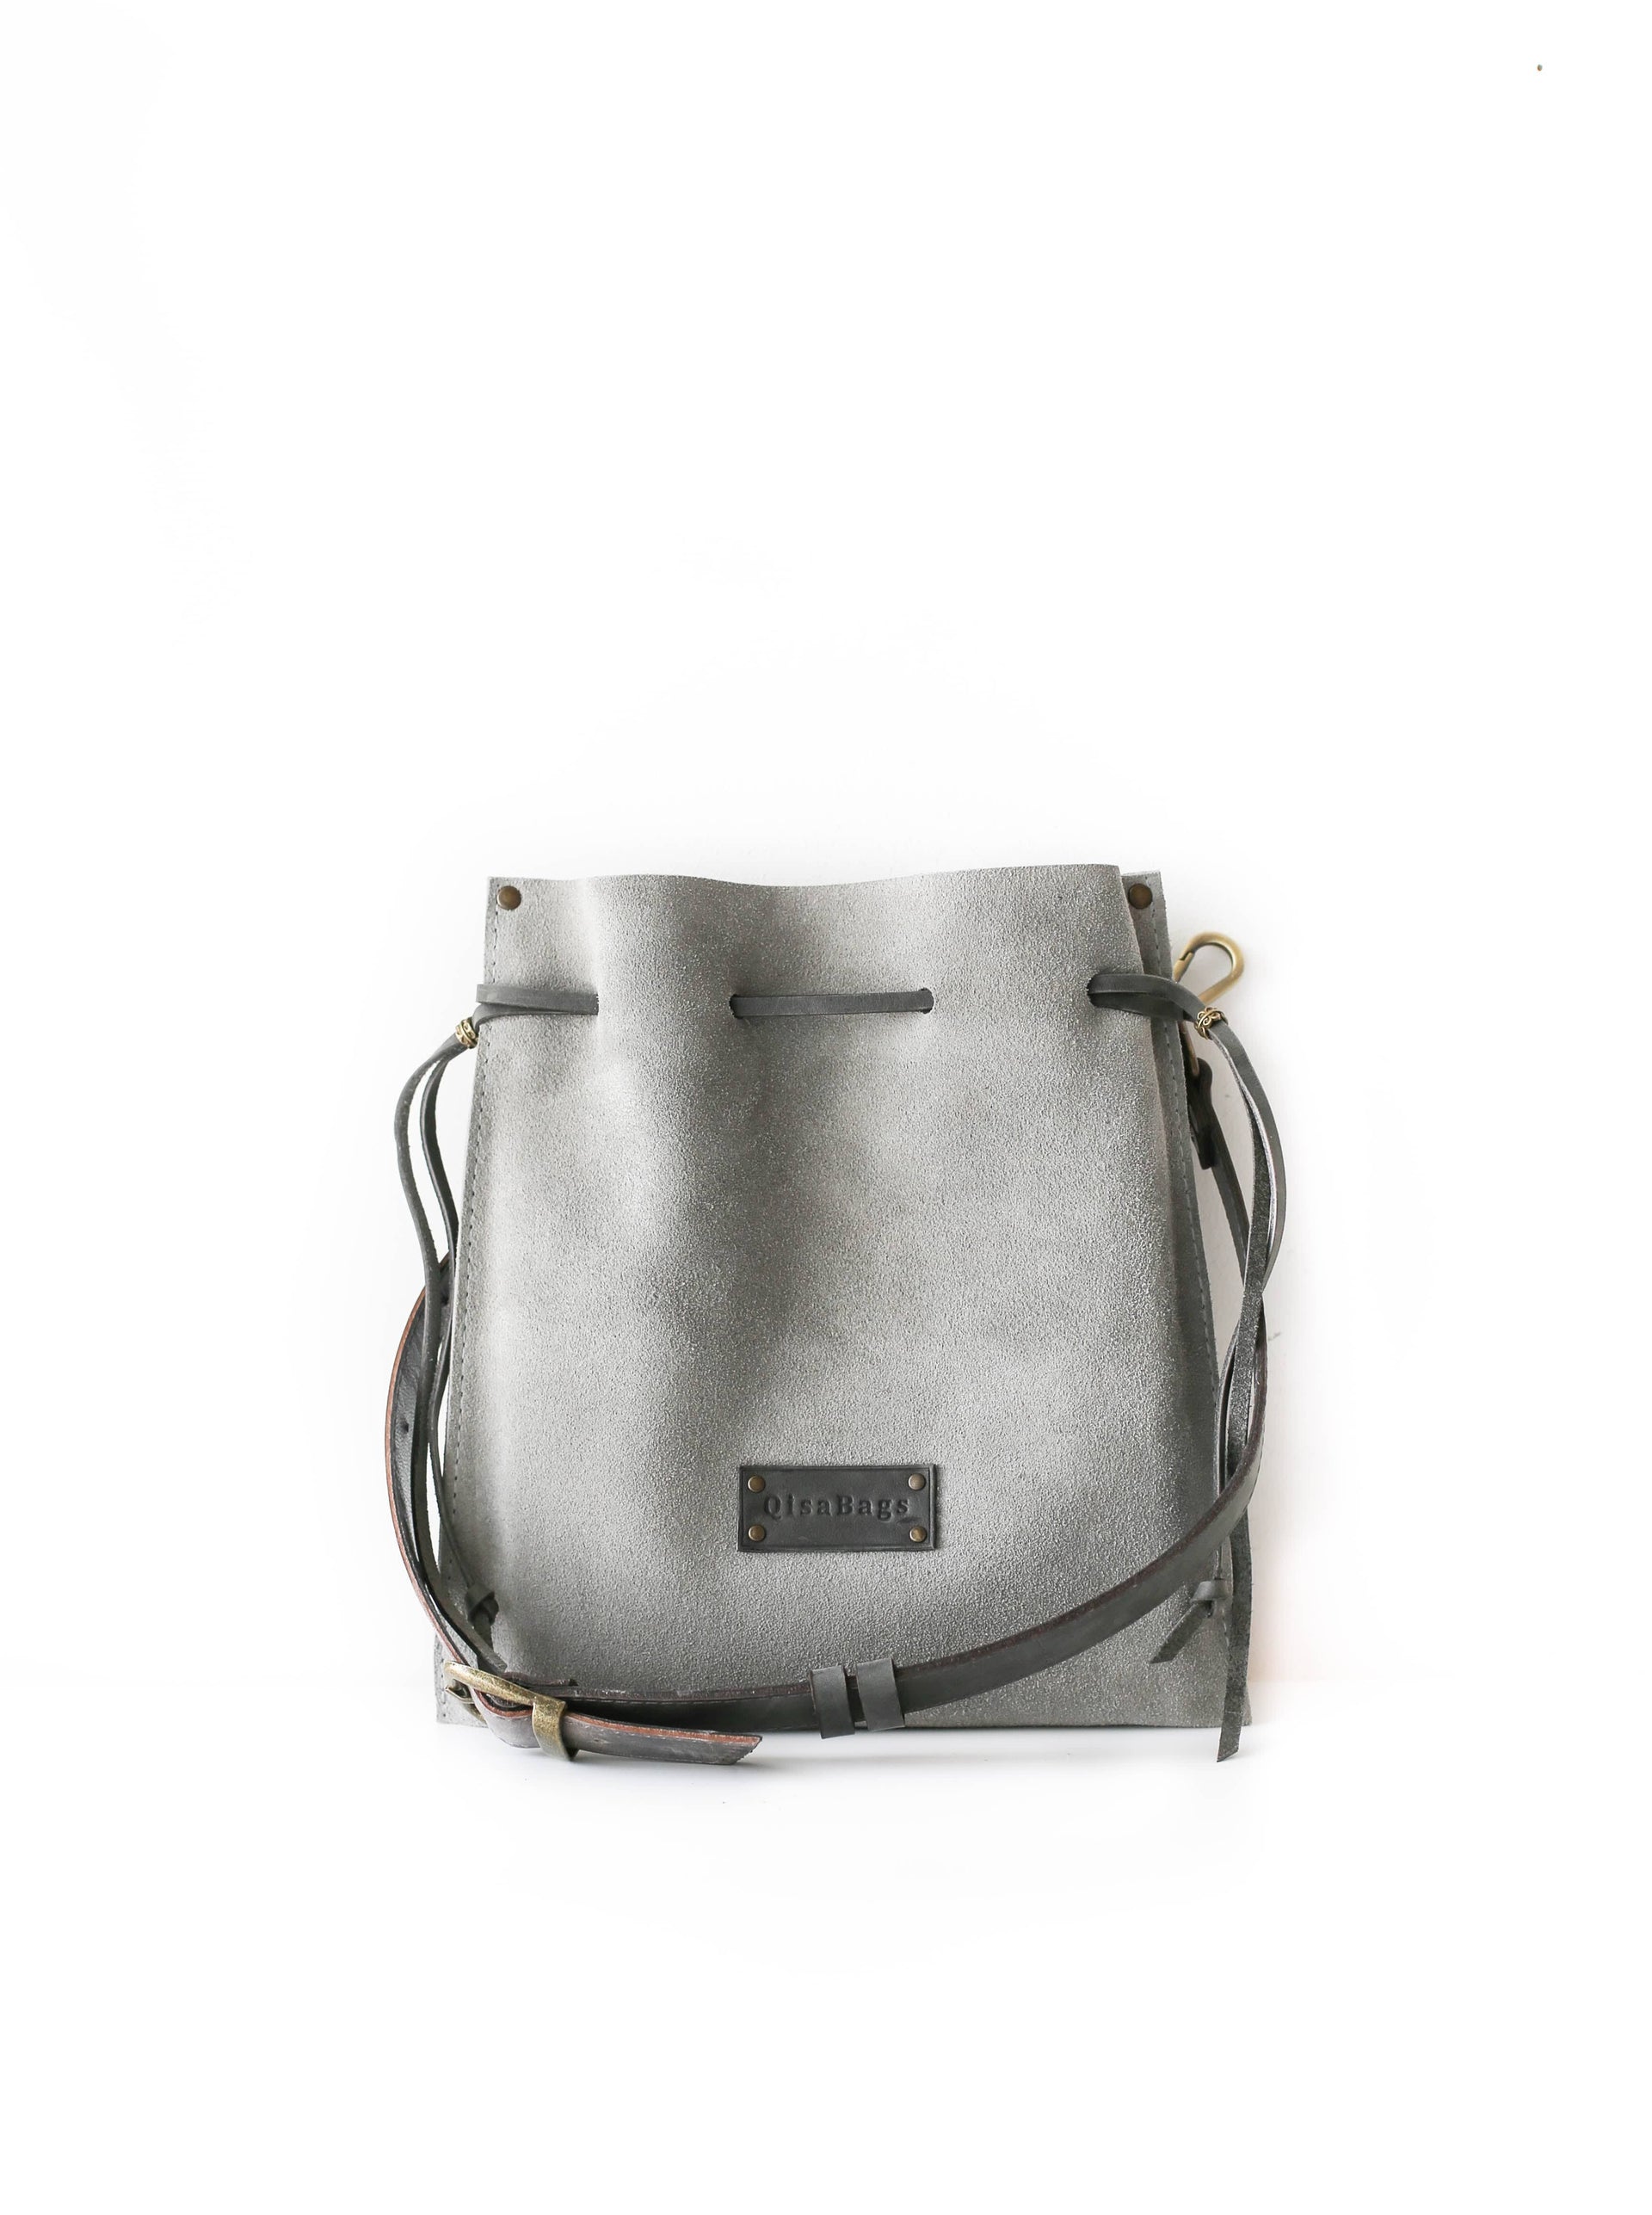 gray leather pouch